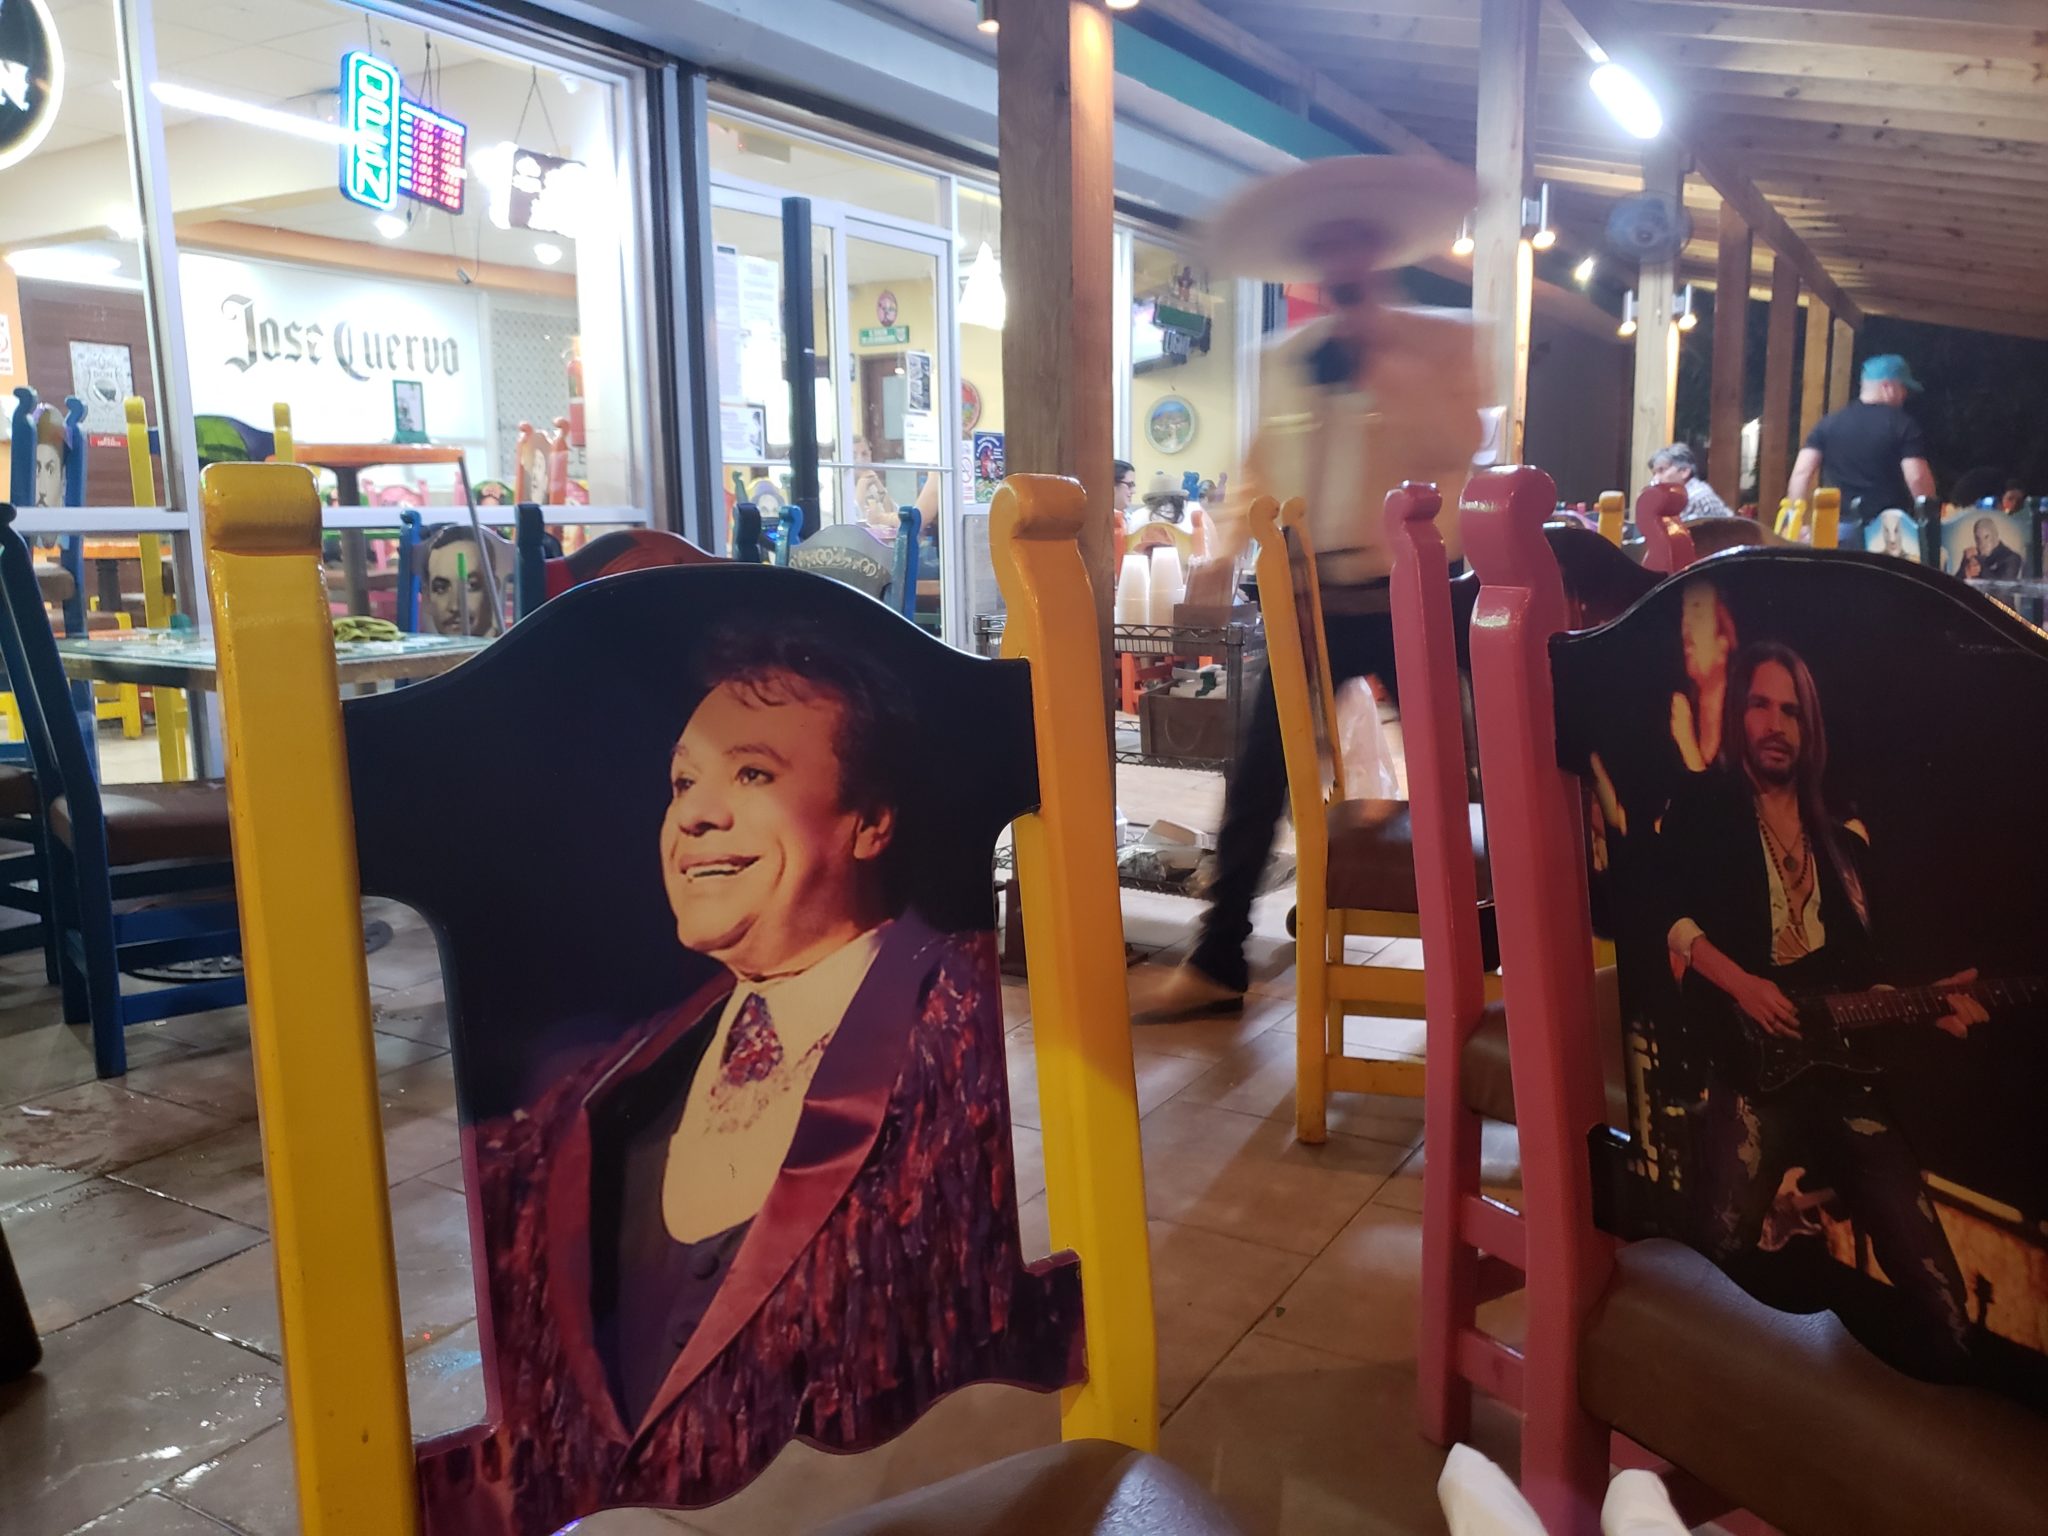 a group of chairs with a picture of a man on them